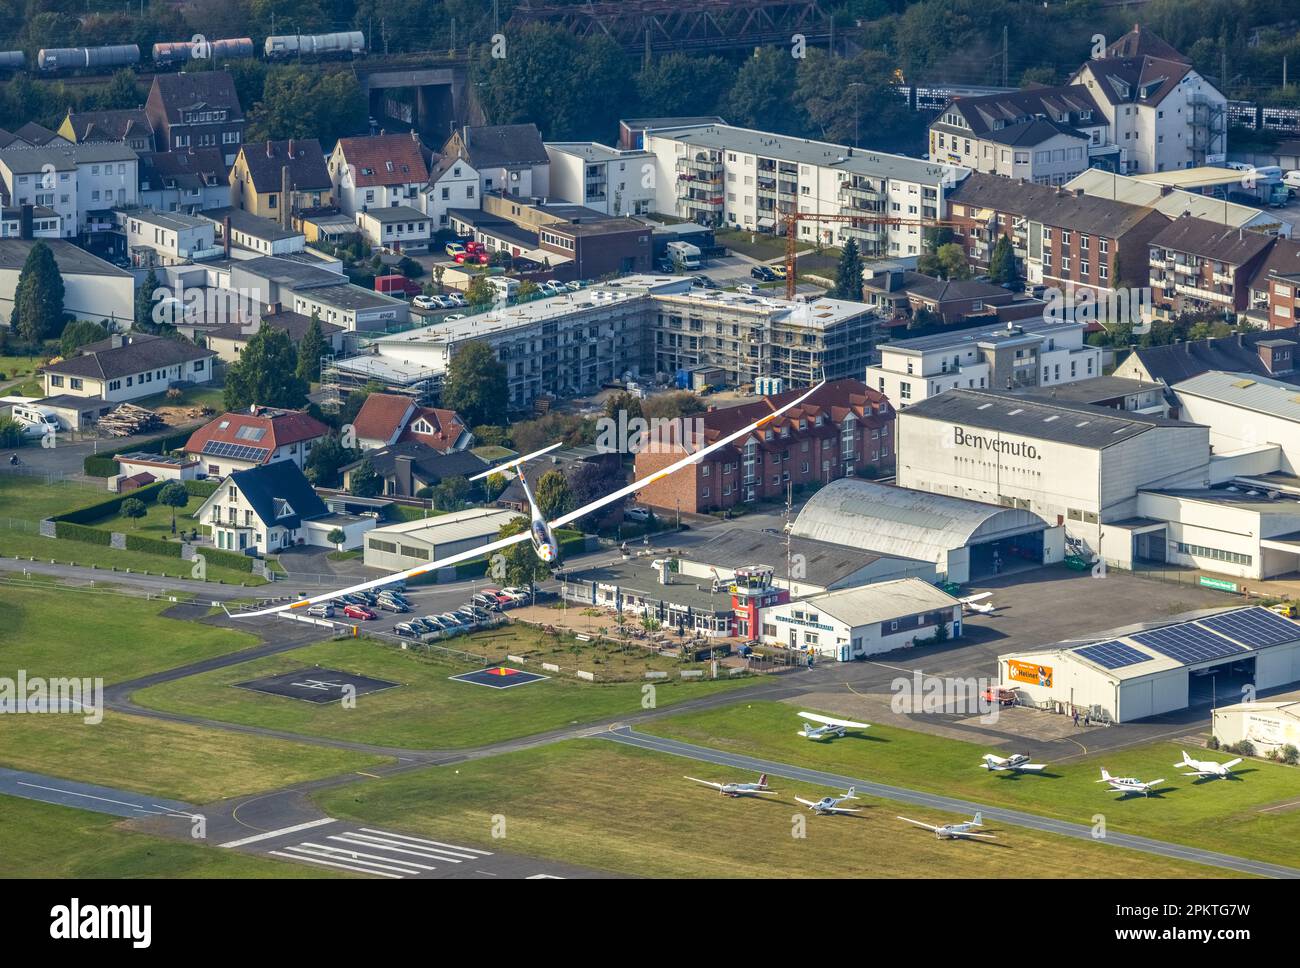 Aerial view, Duo Discus high performance two seater D-4199 over Hamm airfield in the district of Heessen in Hamm, Ruhr area, North Rhine-Westphalia, G Stock Photo